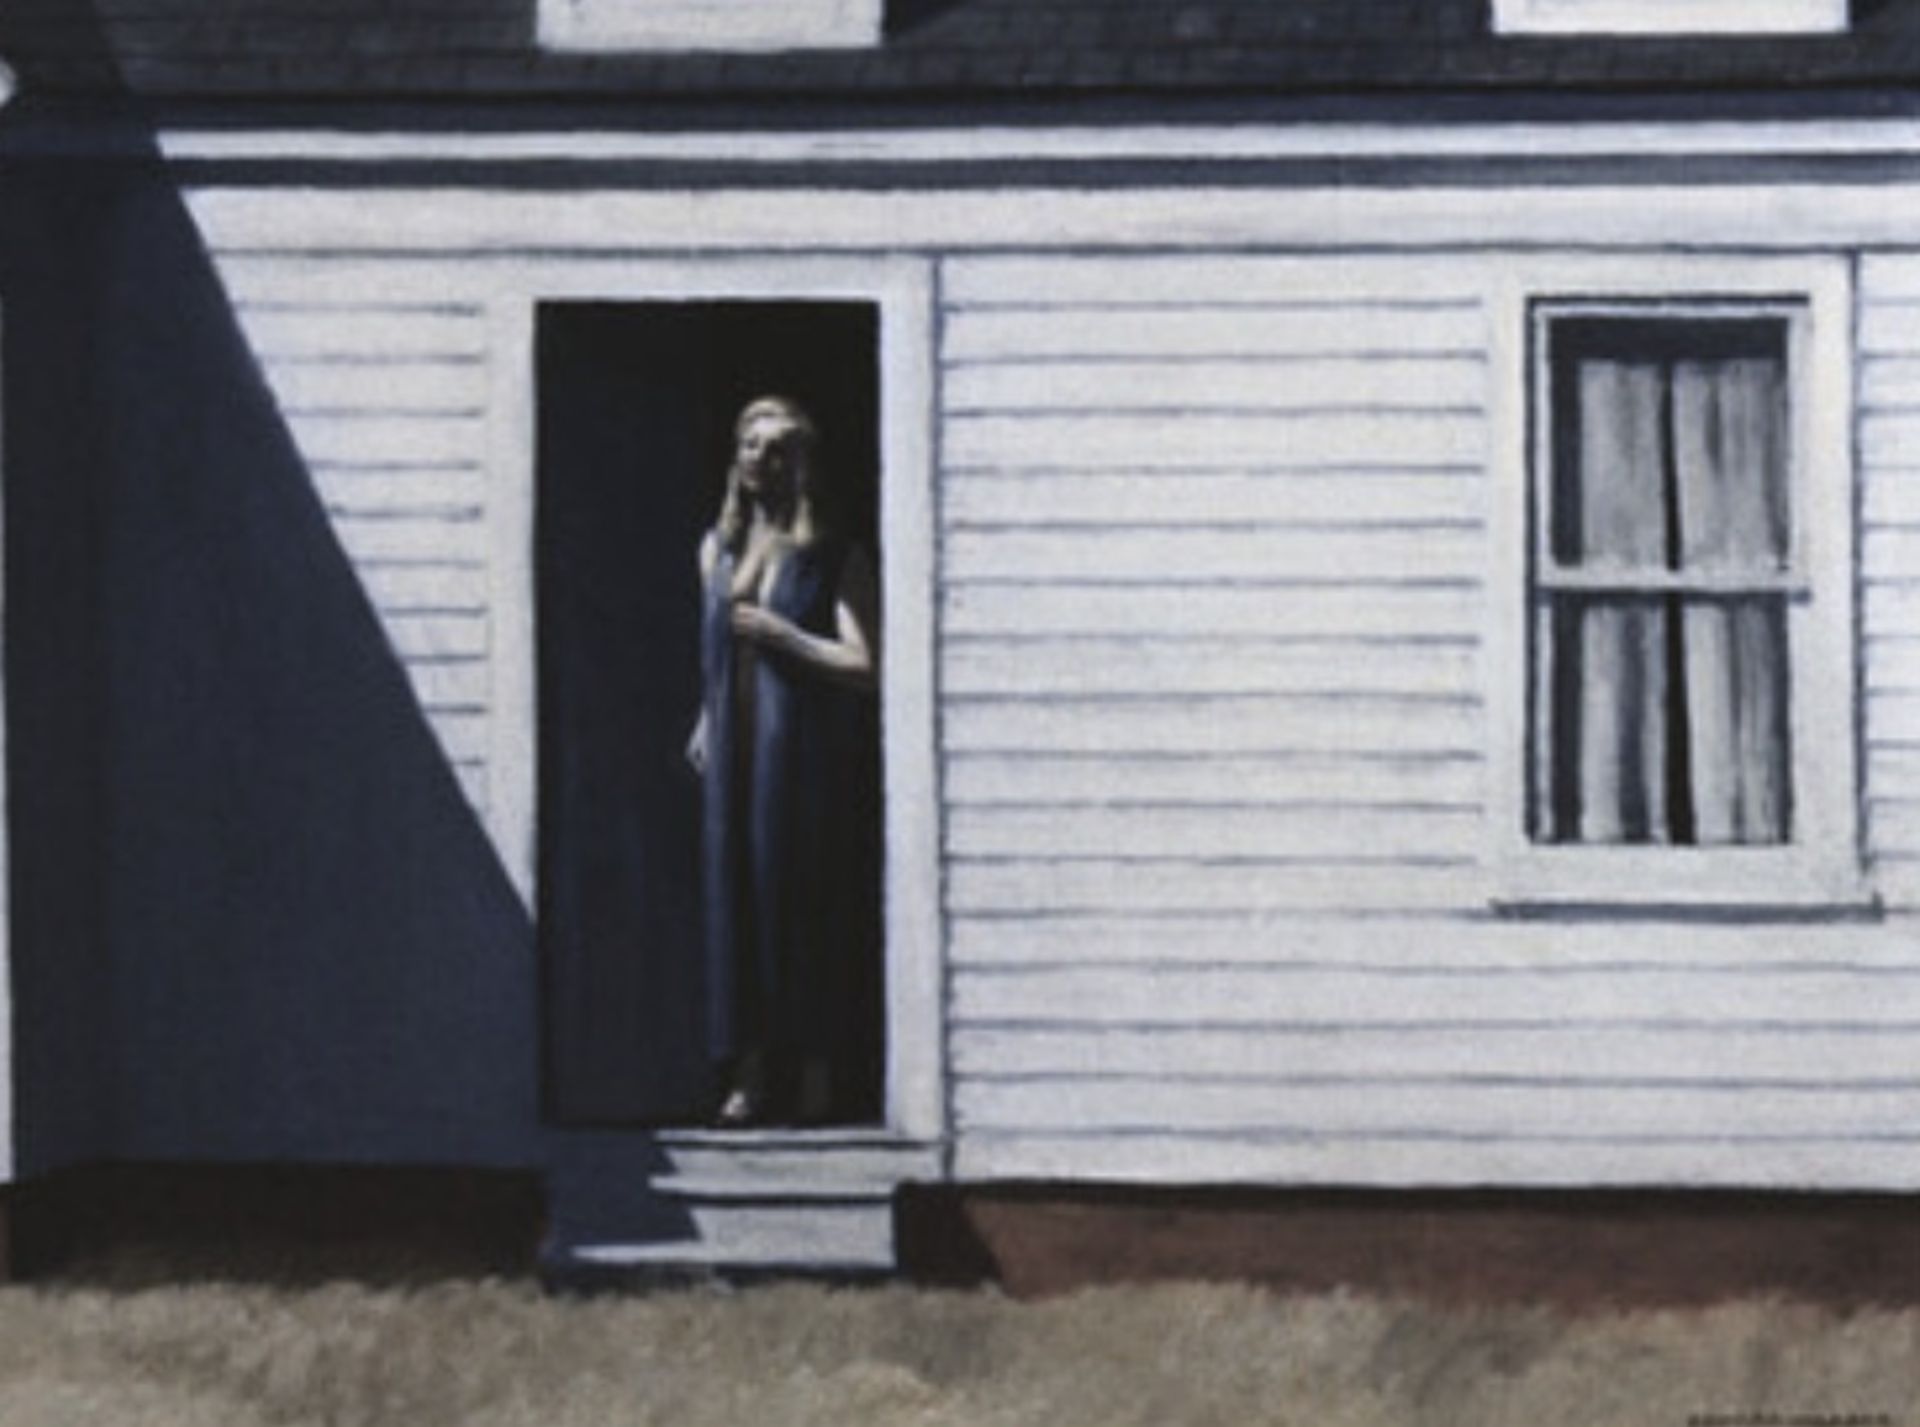 Edward Hopper "High Noon" Offset Lithograph - Image 5 of 5